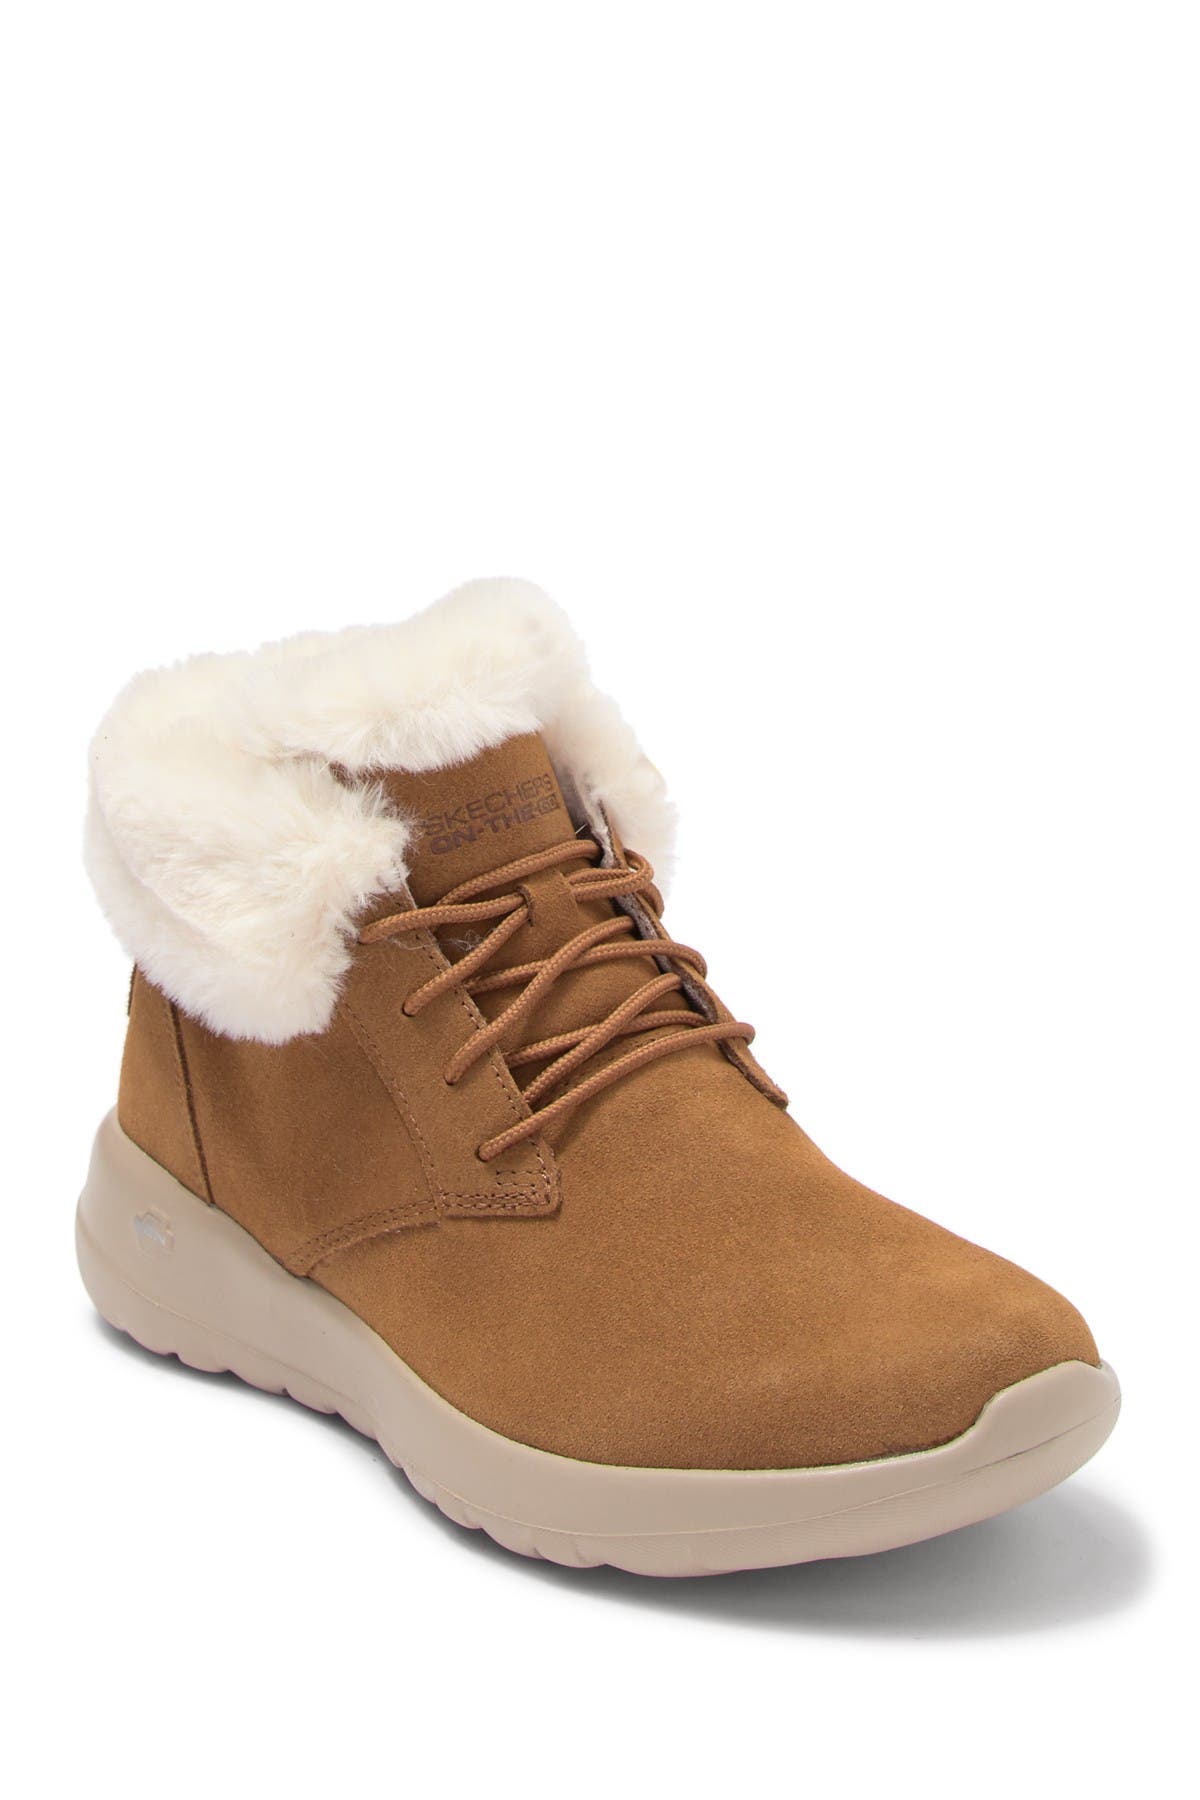 fur lined skechers boots